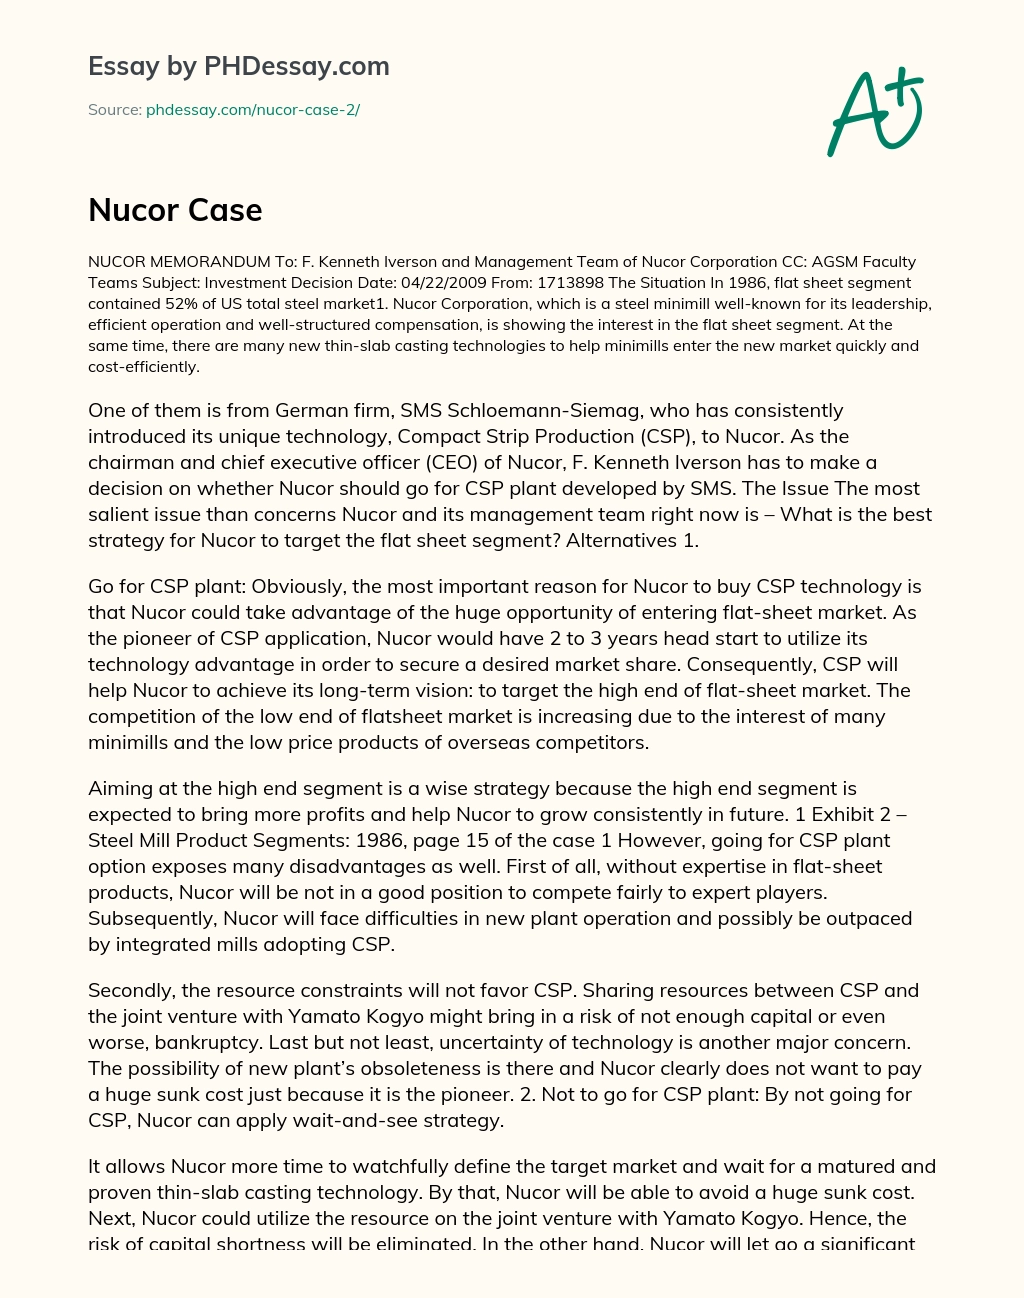 Nucor Corporation’s Decision on Entering the Flat Sheet Segment with CSP Technology essay